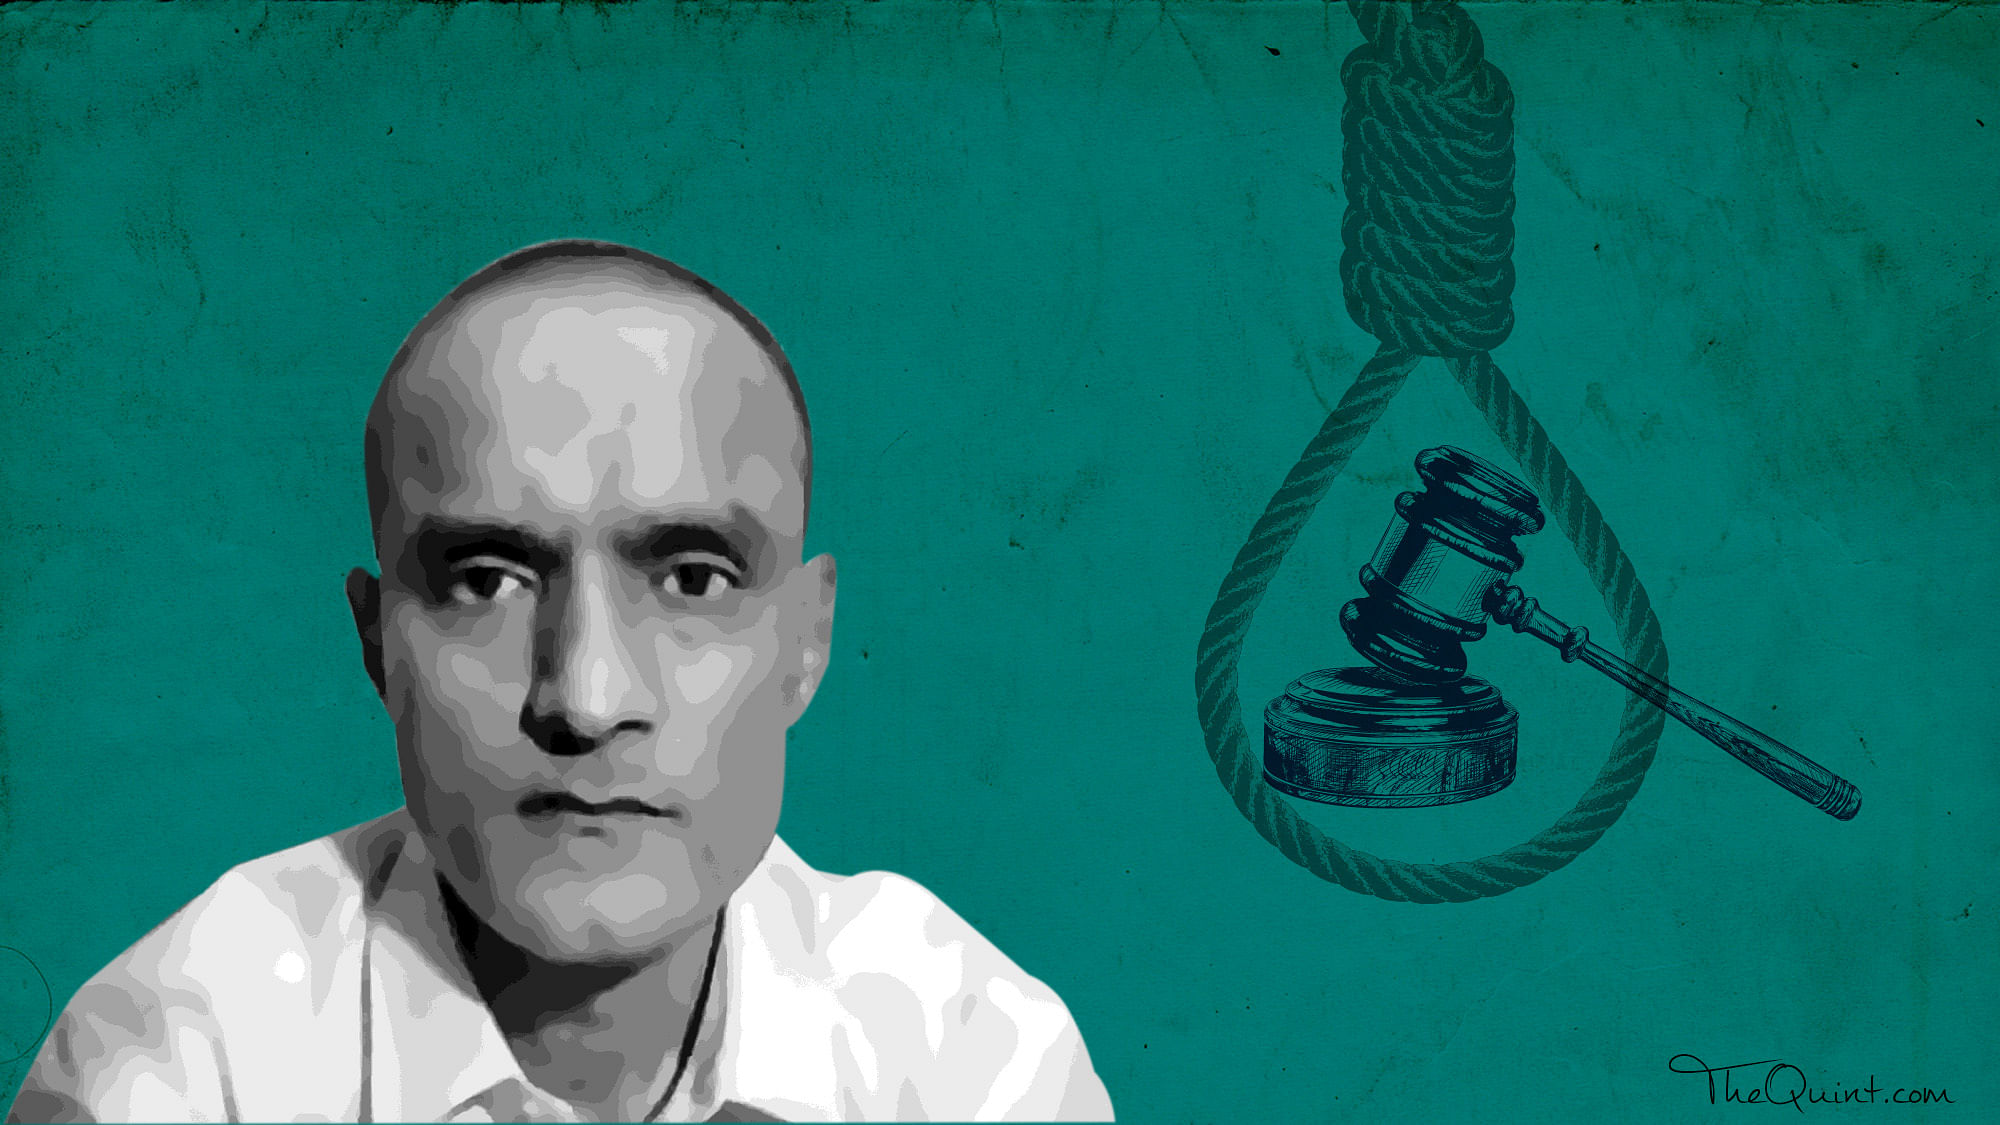 Kulbhushan Jadhav, who Islamabad claims is an Indian spy, was on Monday sentenced to death by a Pakistani military court for espionage. (Photo: <b>The Quint</b>)